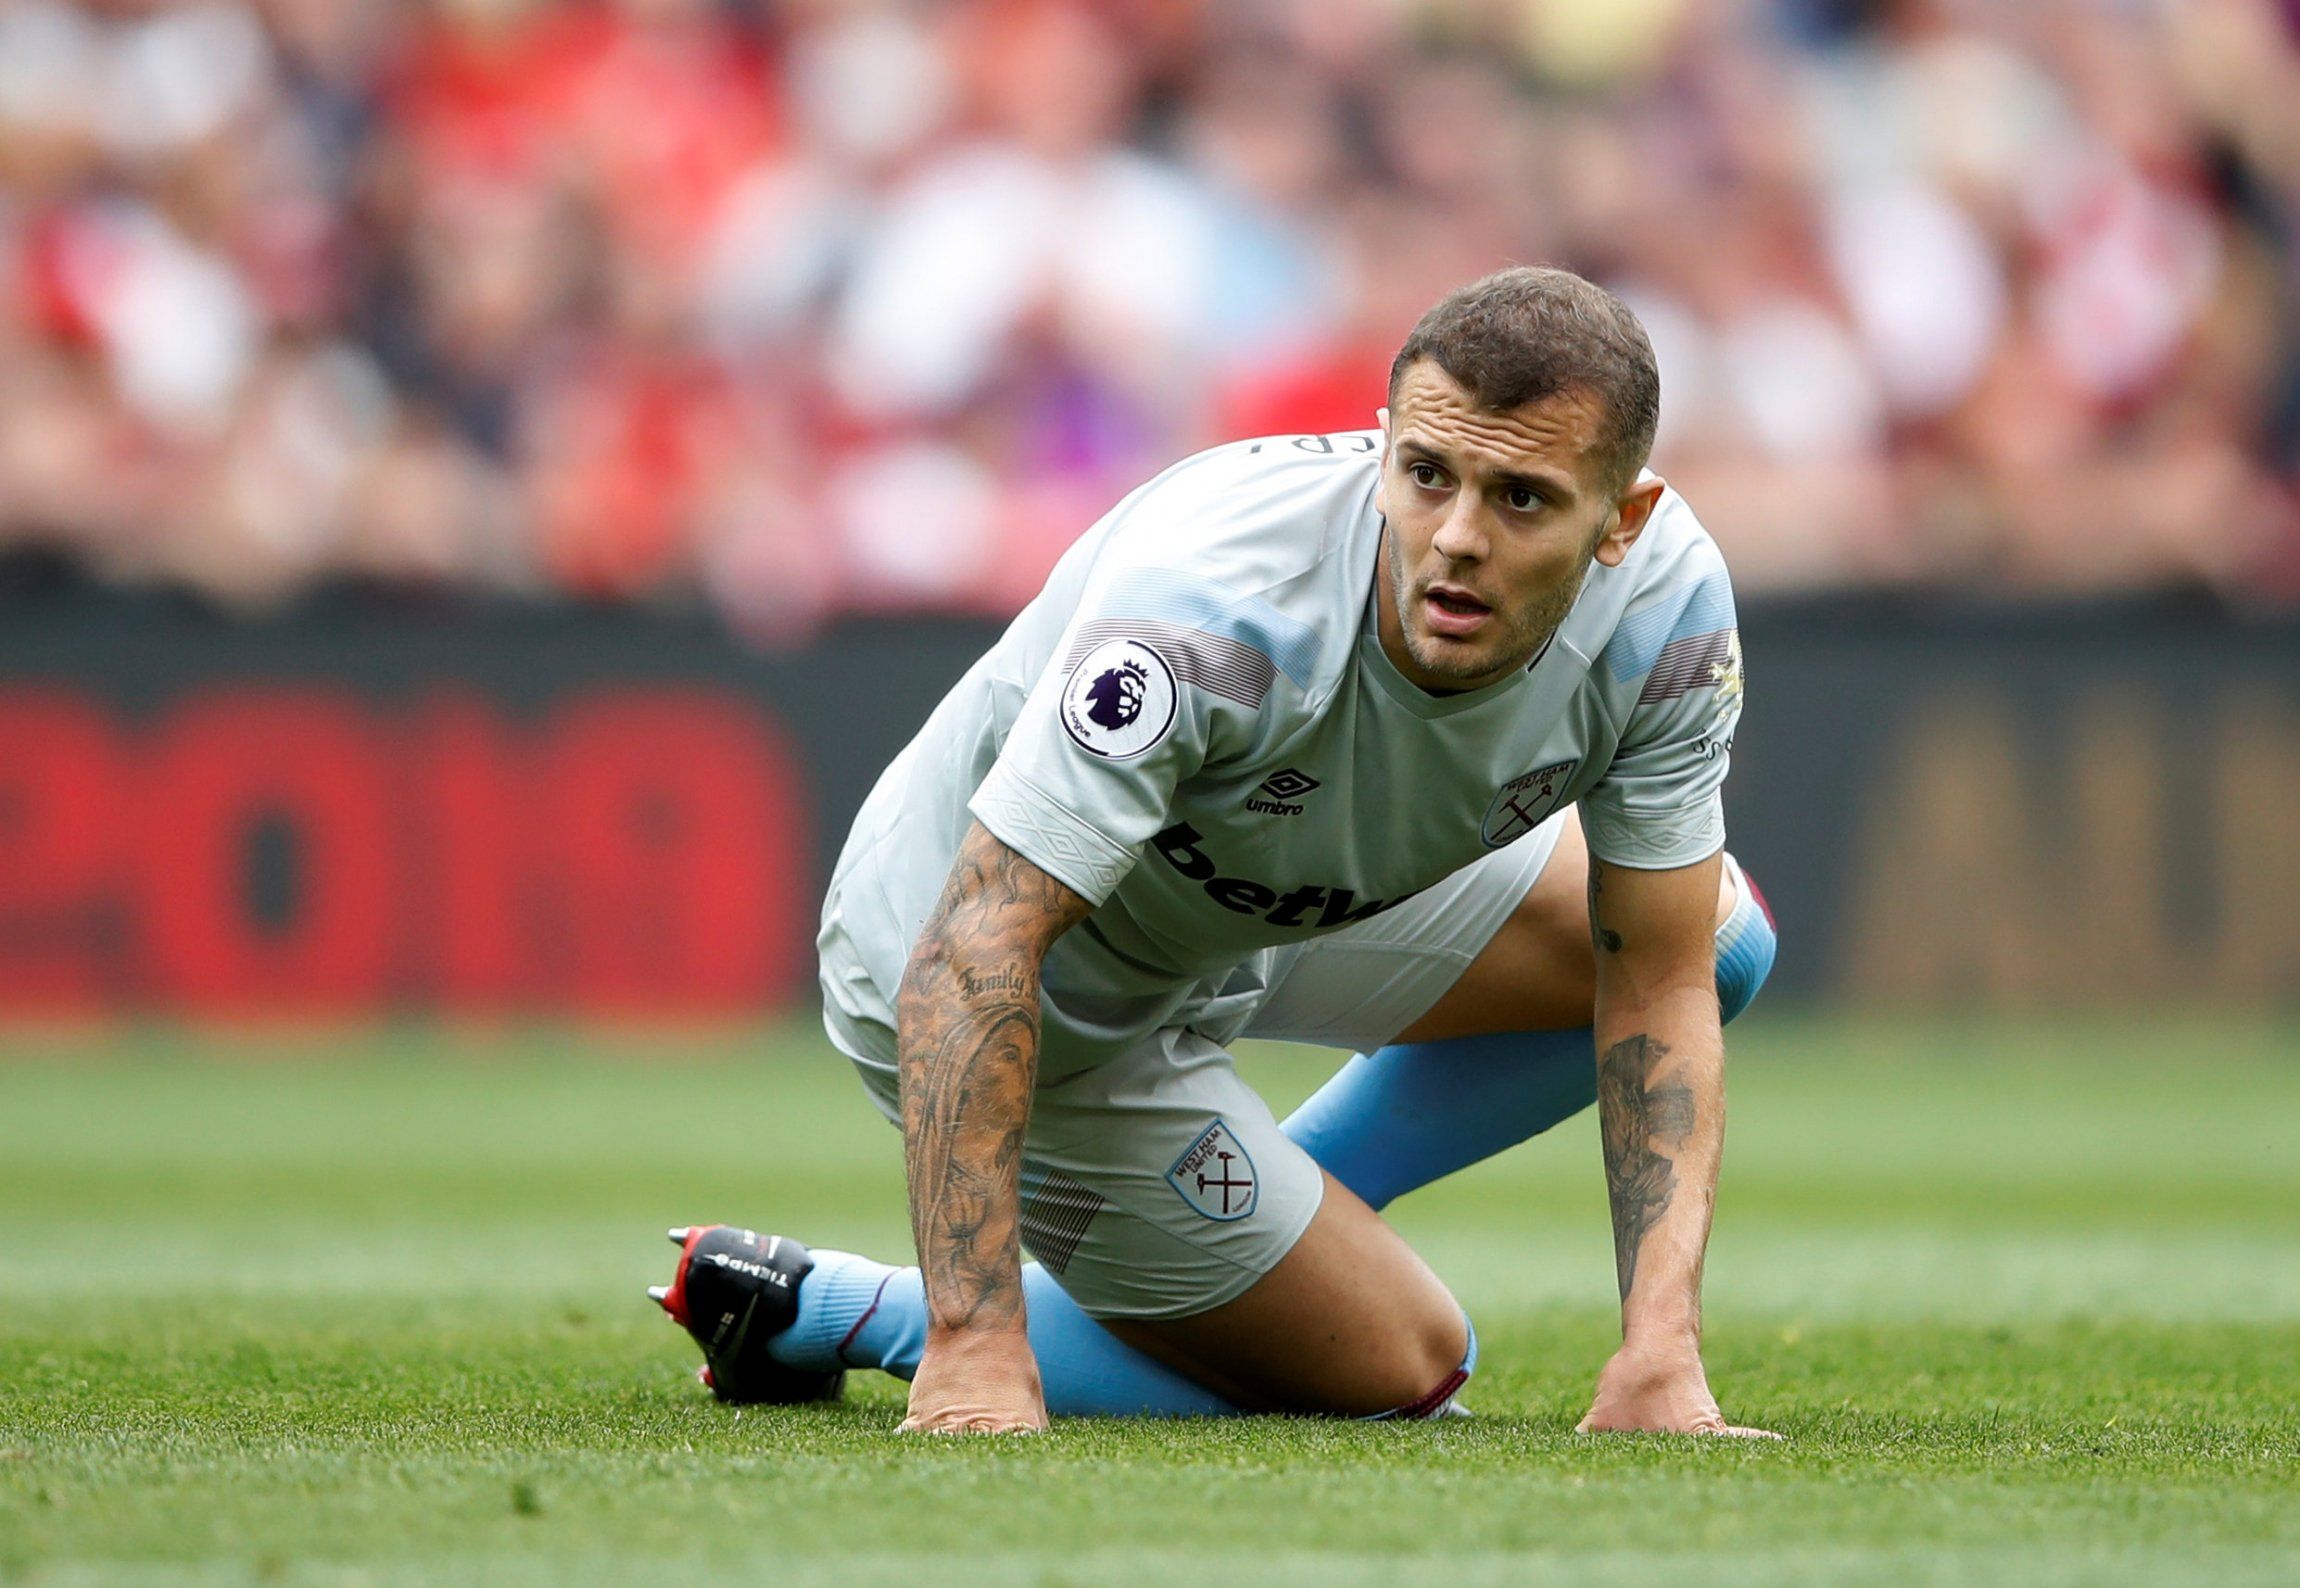 Jack Wilshere rises to his feet during West Ham United v Liverpool